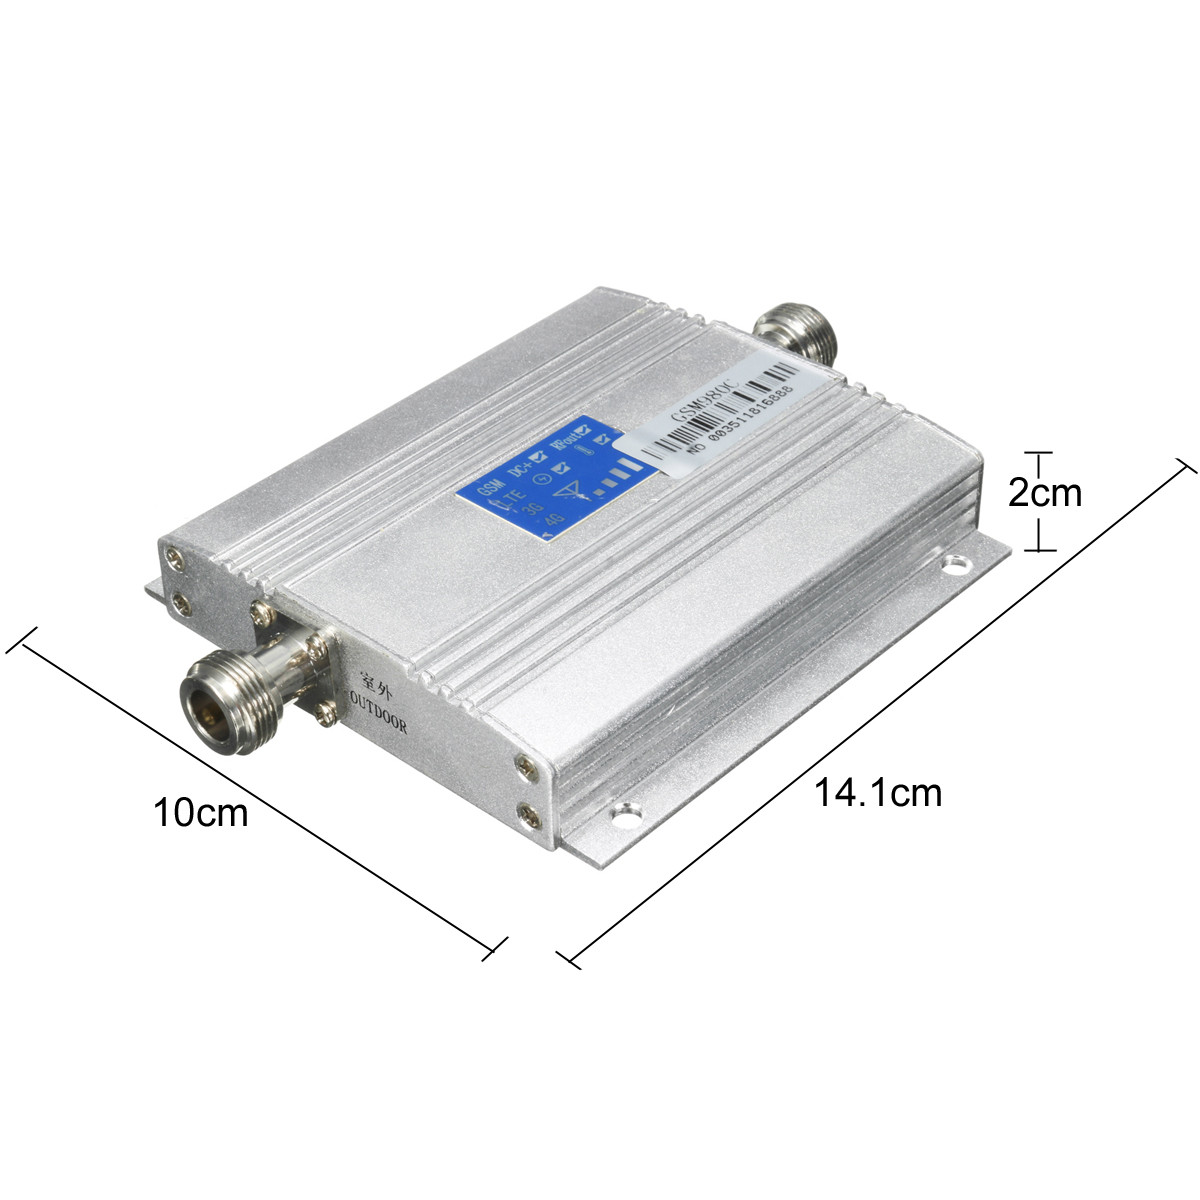 110-240V-LCD-GSM-900Mhz-Cell-Phone-Signal-Repeater-Booster-AmplifierYagi-Antenna-Kit-1092498-2